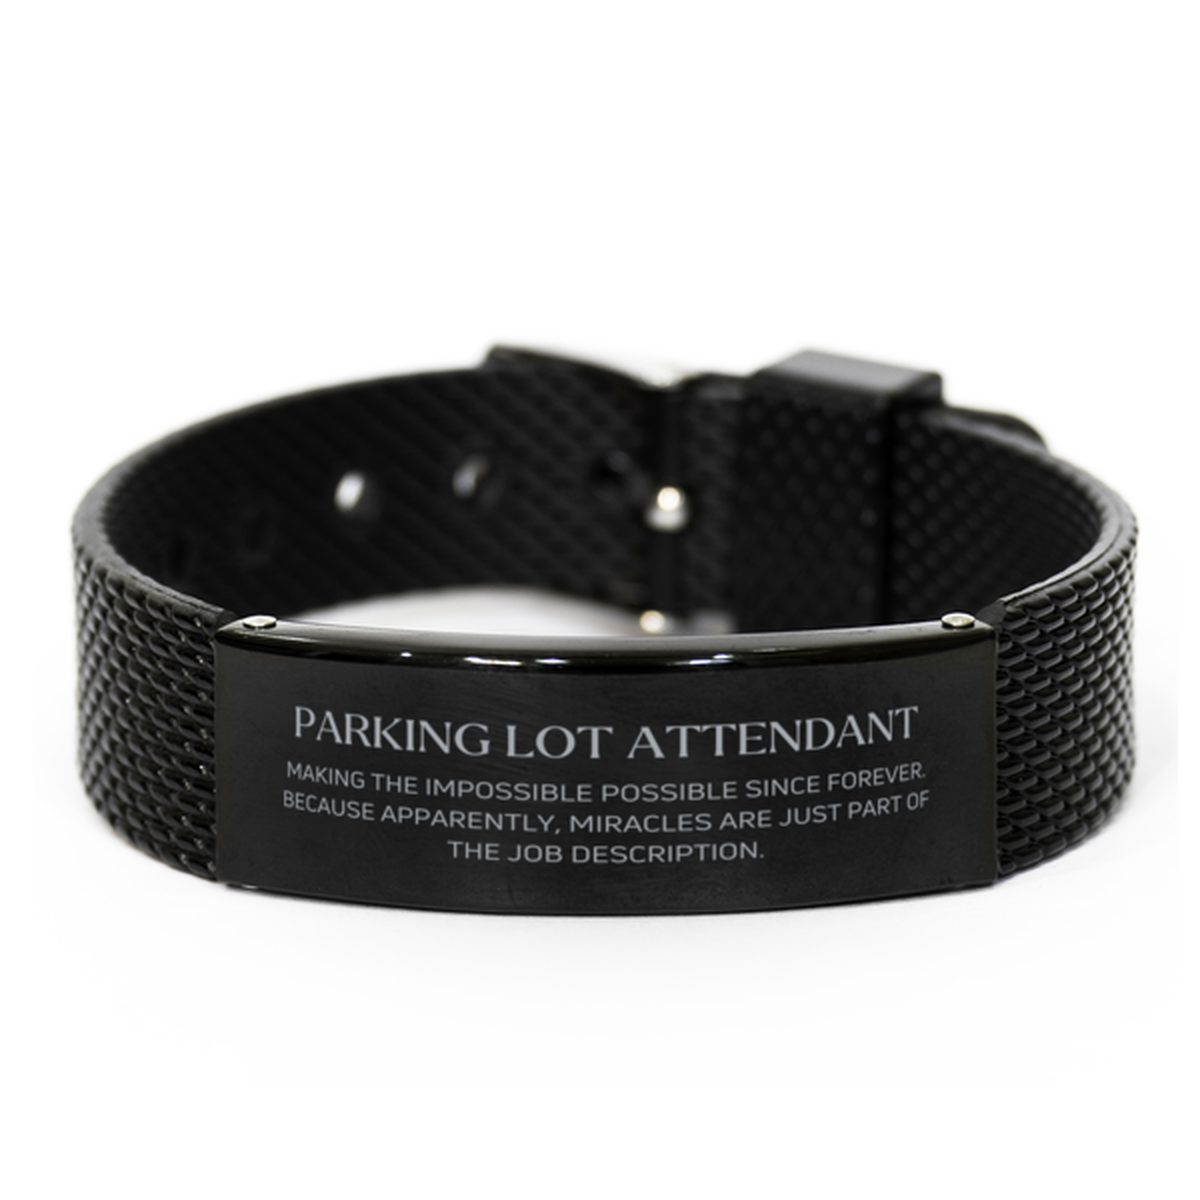 Funny Parking Lot Attendant Gifts, Miracles are just part of the job description, Inspirational Birthday Black Shark Mesh Bracelet For Parking Lot Attendant, Men, Women, Coworkers, Friends, Boss